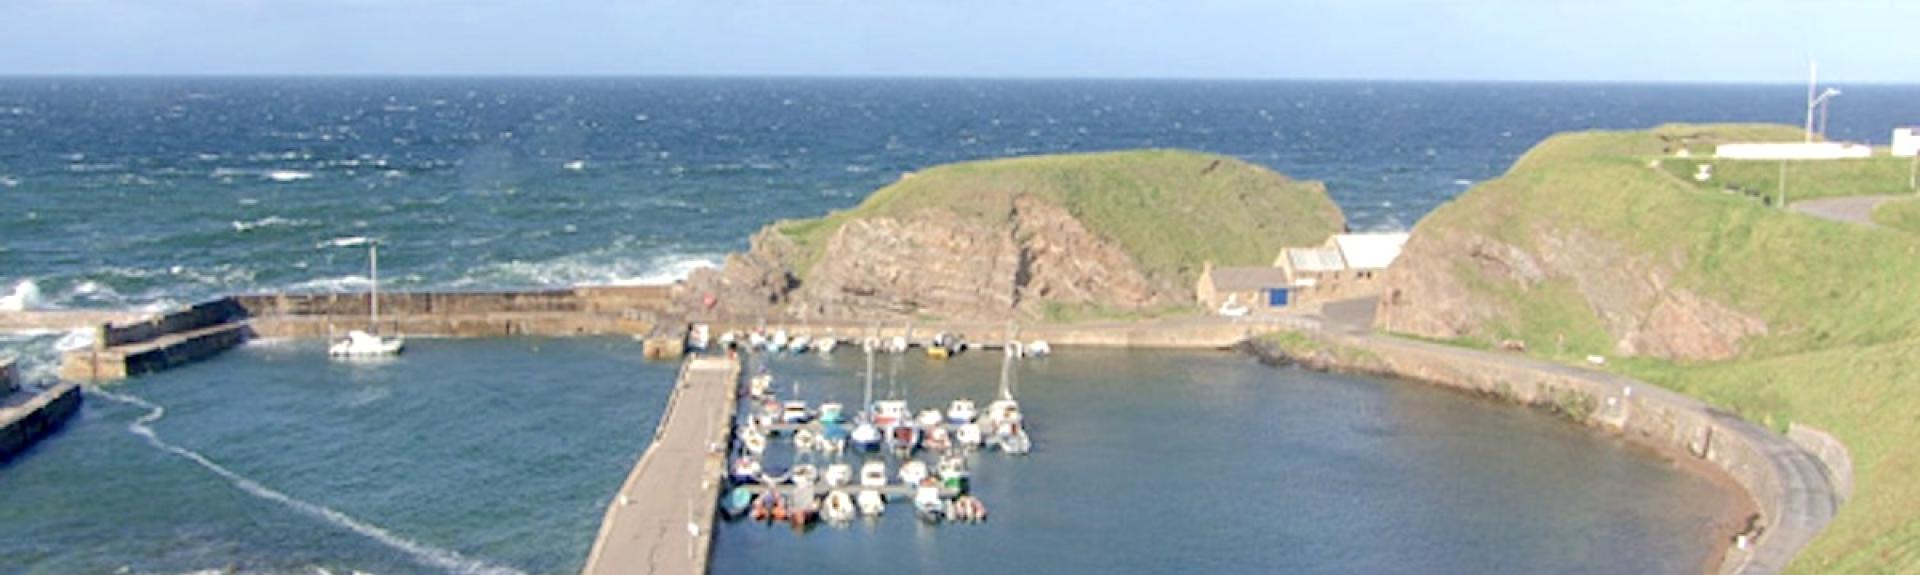 Aerial view of a Scottish harbour with small fishing boats in a natural cove.